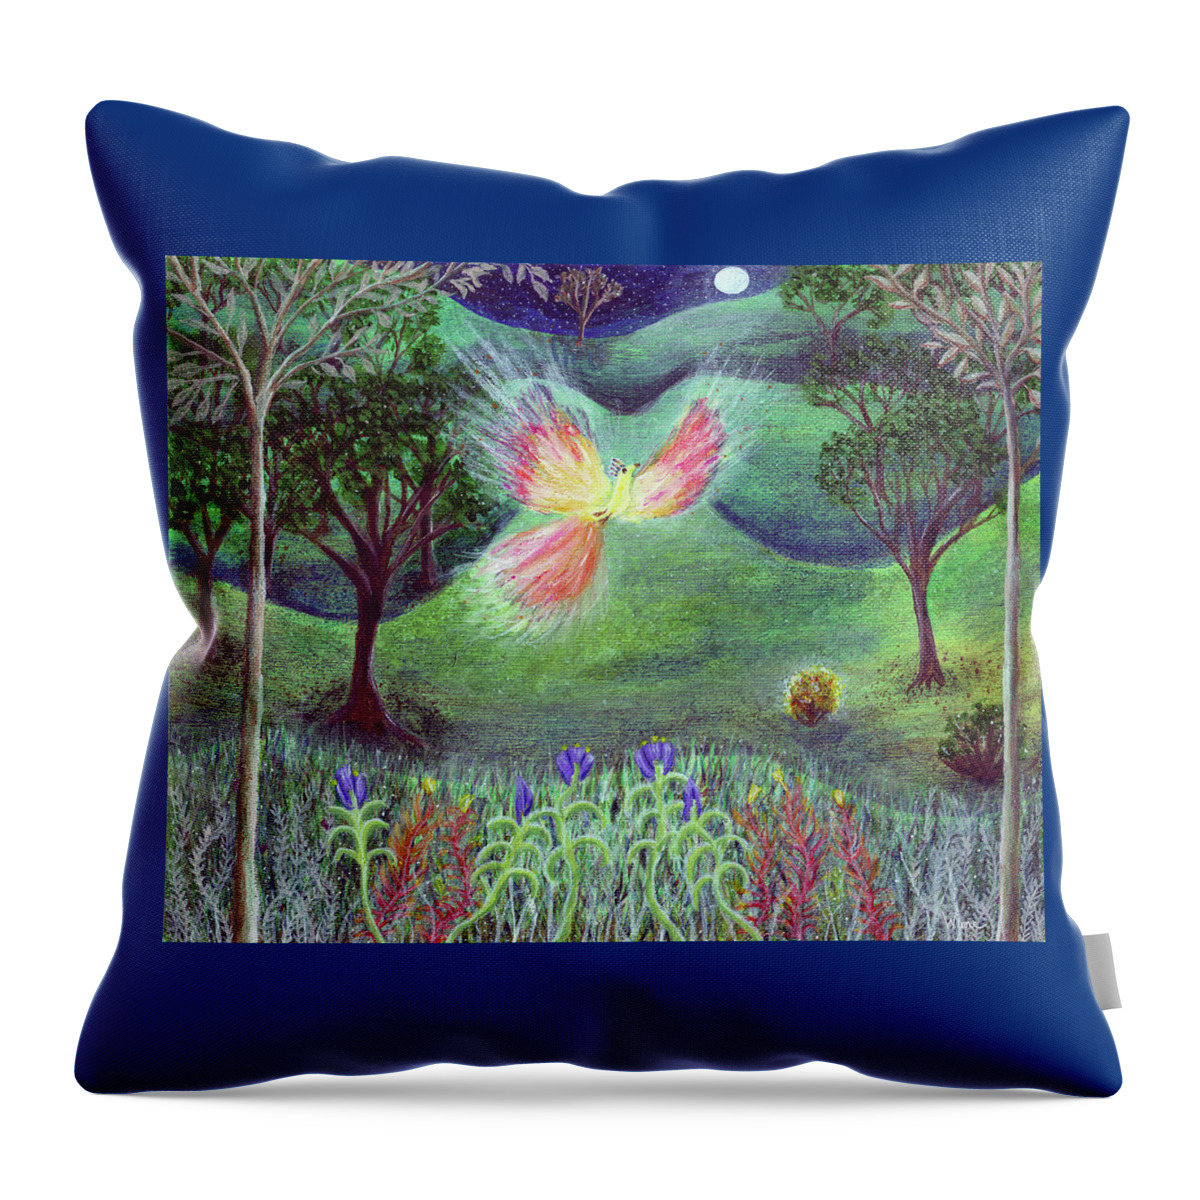 Lise Winne Throw Pillow featuring the painting Night With Fire bird and Sacred Bush by Lise Winne